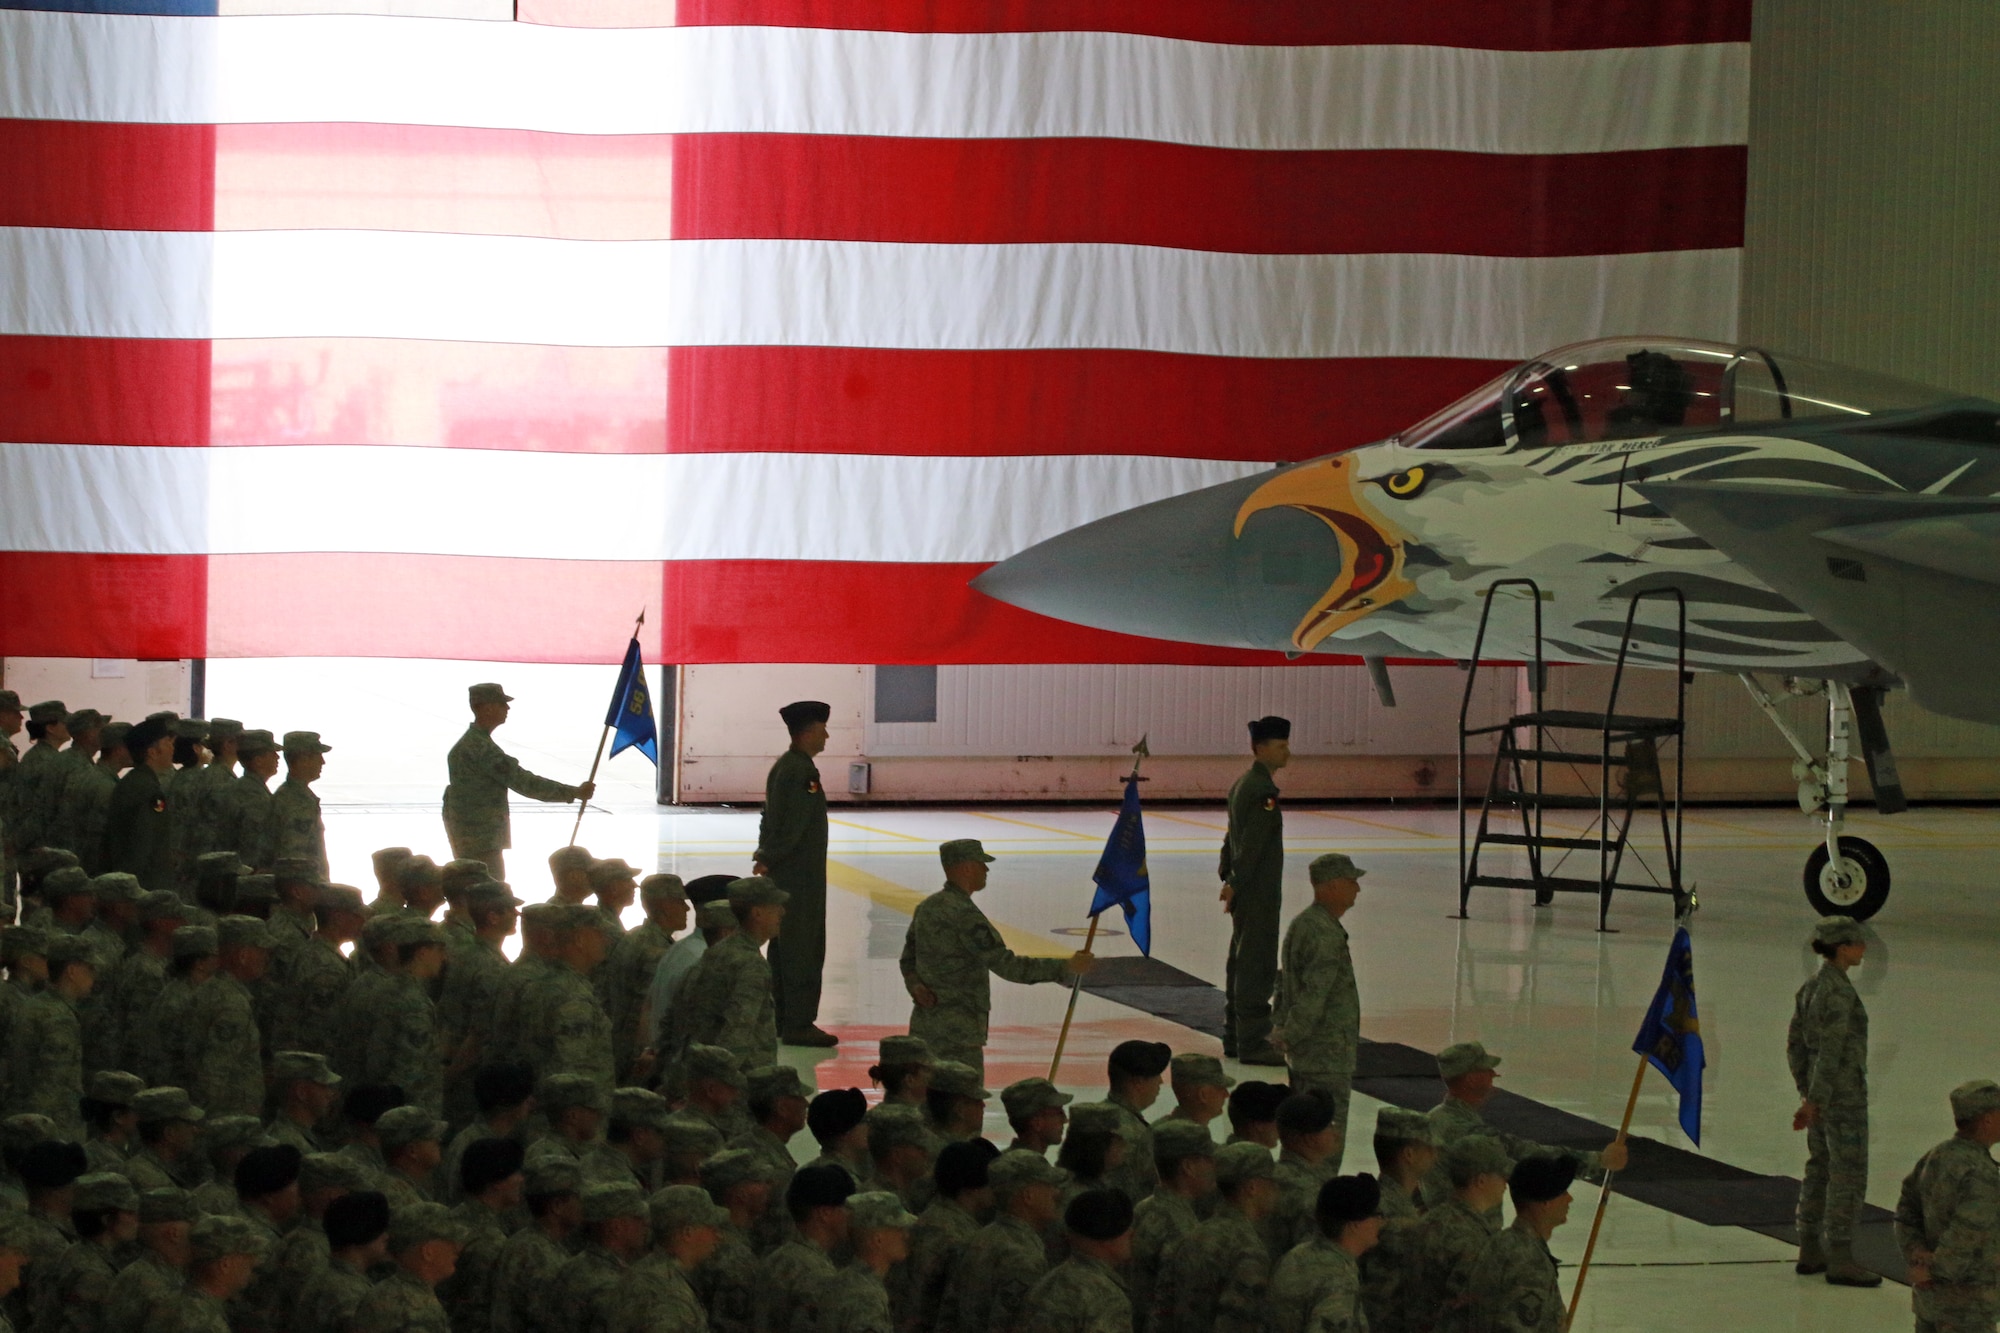 Airmen of the 173rd Fighter Wing stand at parade rest during a change of command ceremony in which Col. Jeffrey Smith accepted the helm from Brig. Gen. Kirk Piercewho was promoted in an earlier ceremony. (U.S. Air National Guard photo by Tech. Sgt. Jefferson Thompson/released)